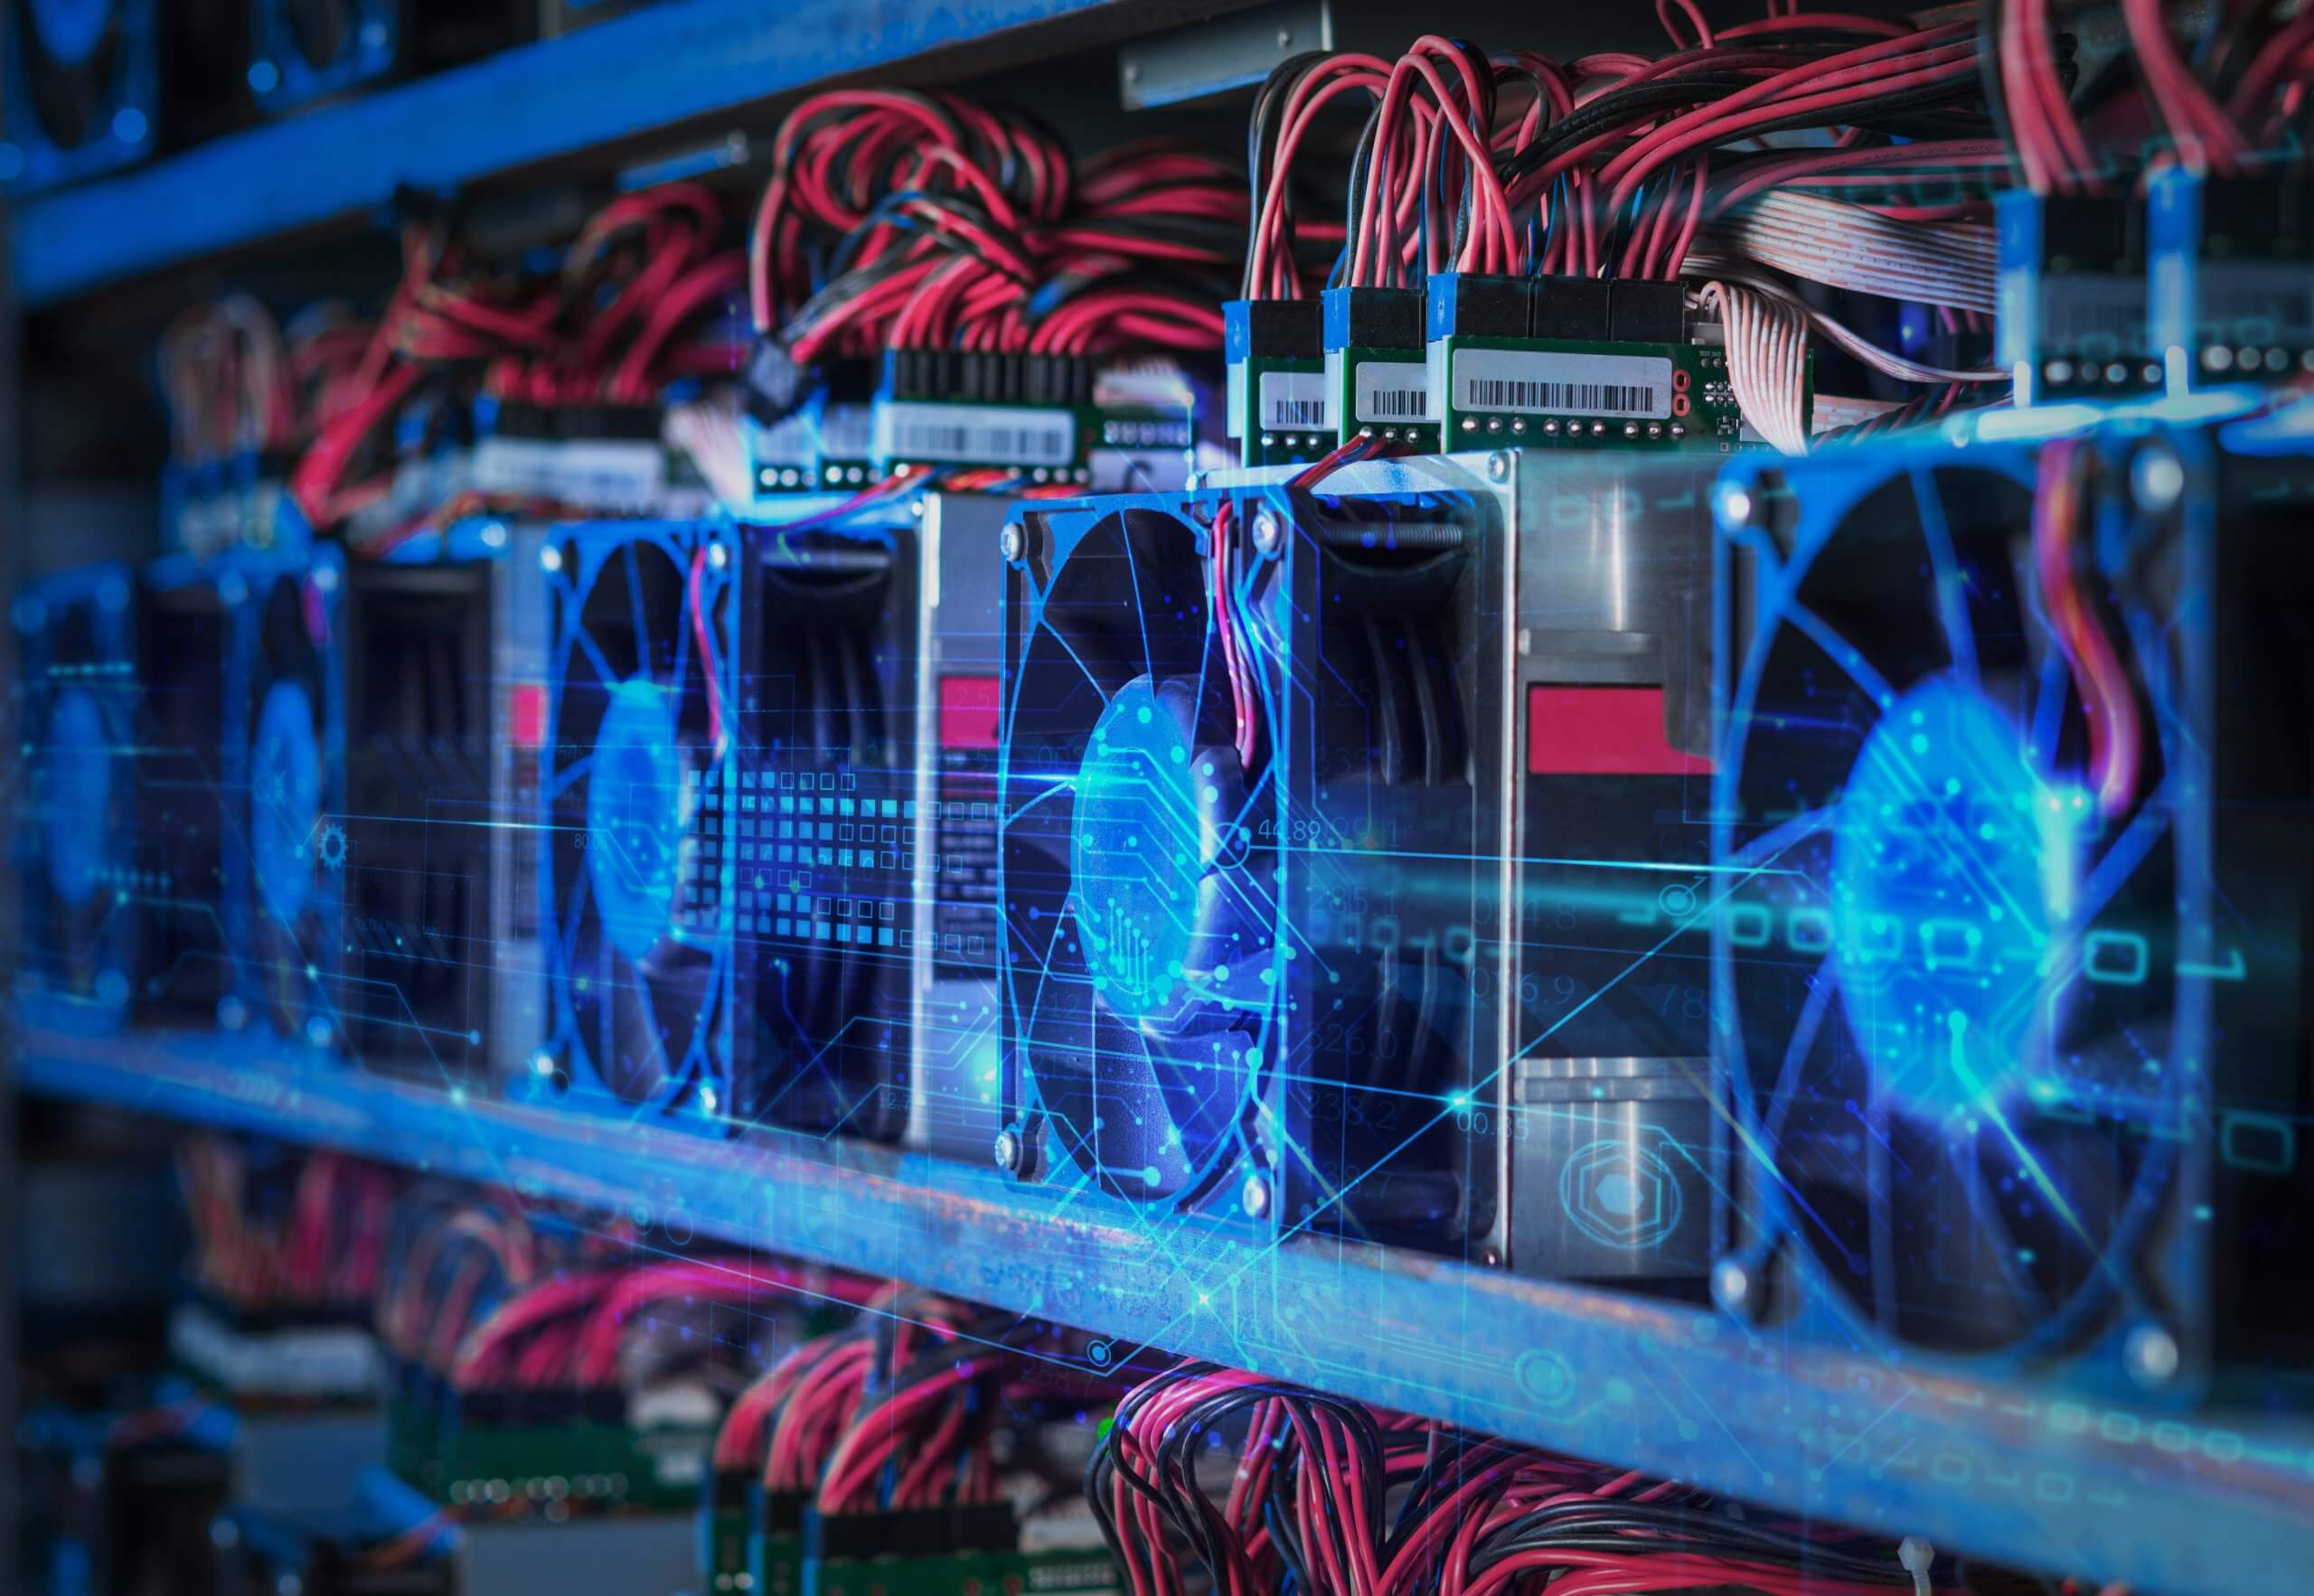 Cryptocurrency Miners hidden in websites now run even after users close the  browser